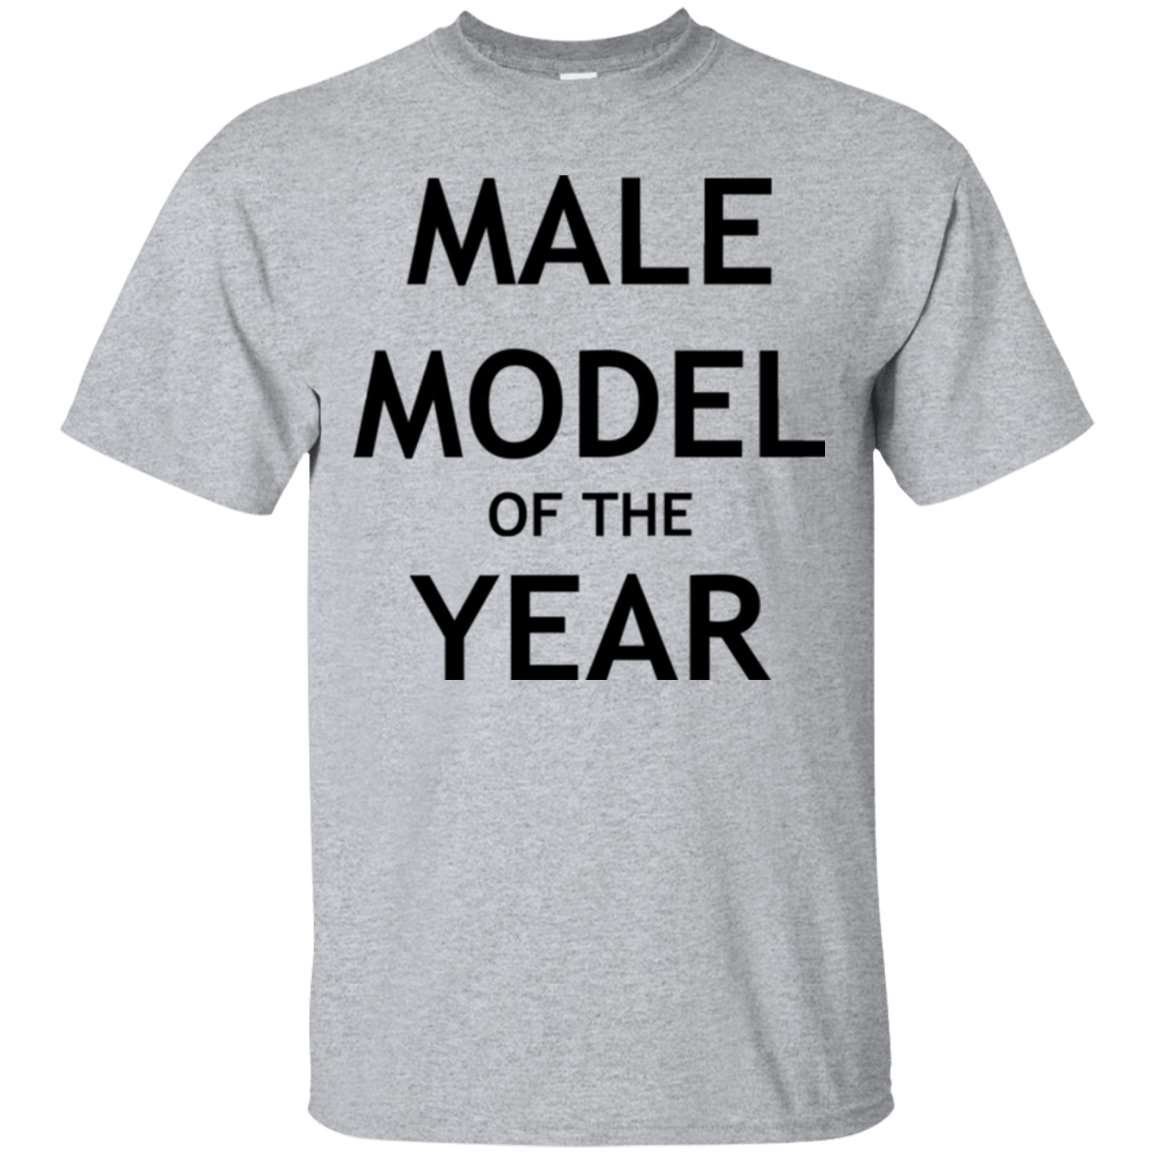 T-Shirts Sport Grey / Small Model of the Year T-Shirt